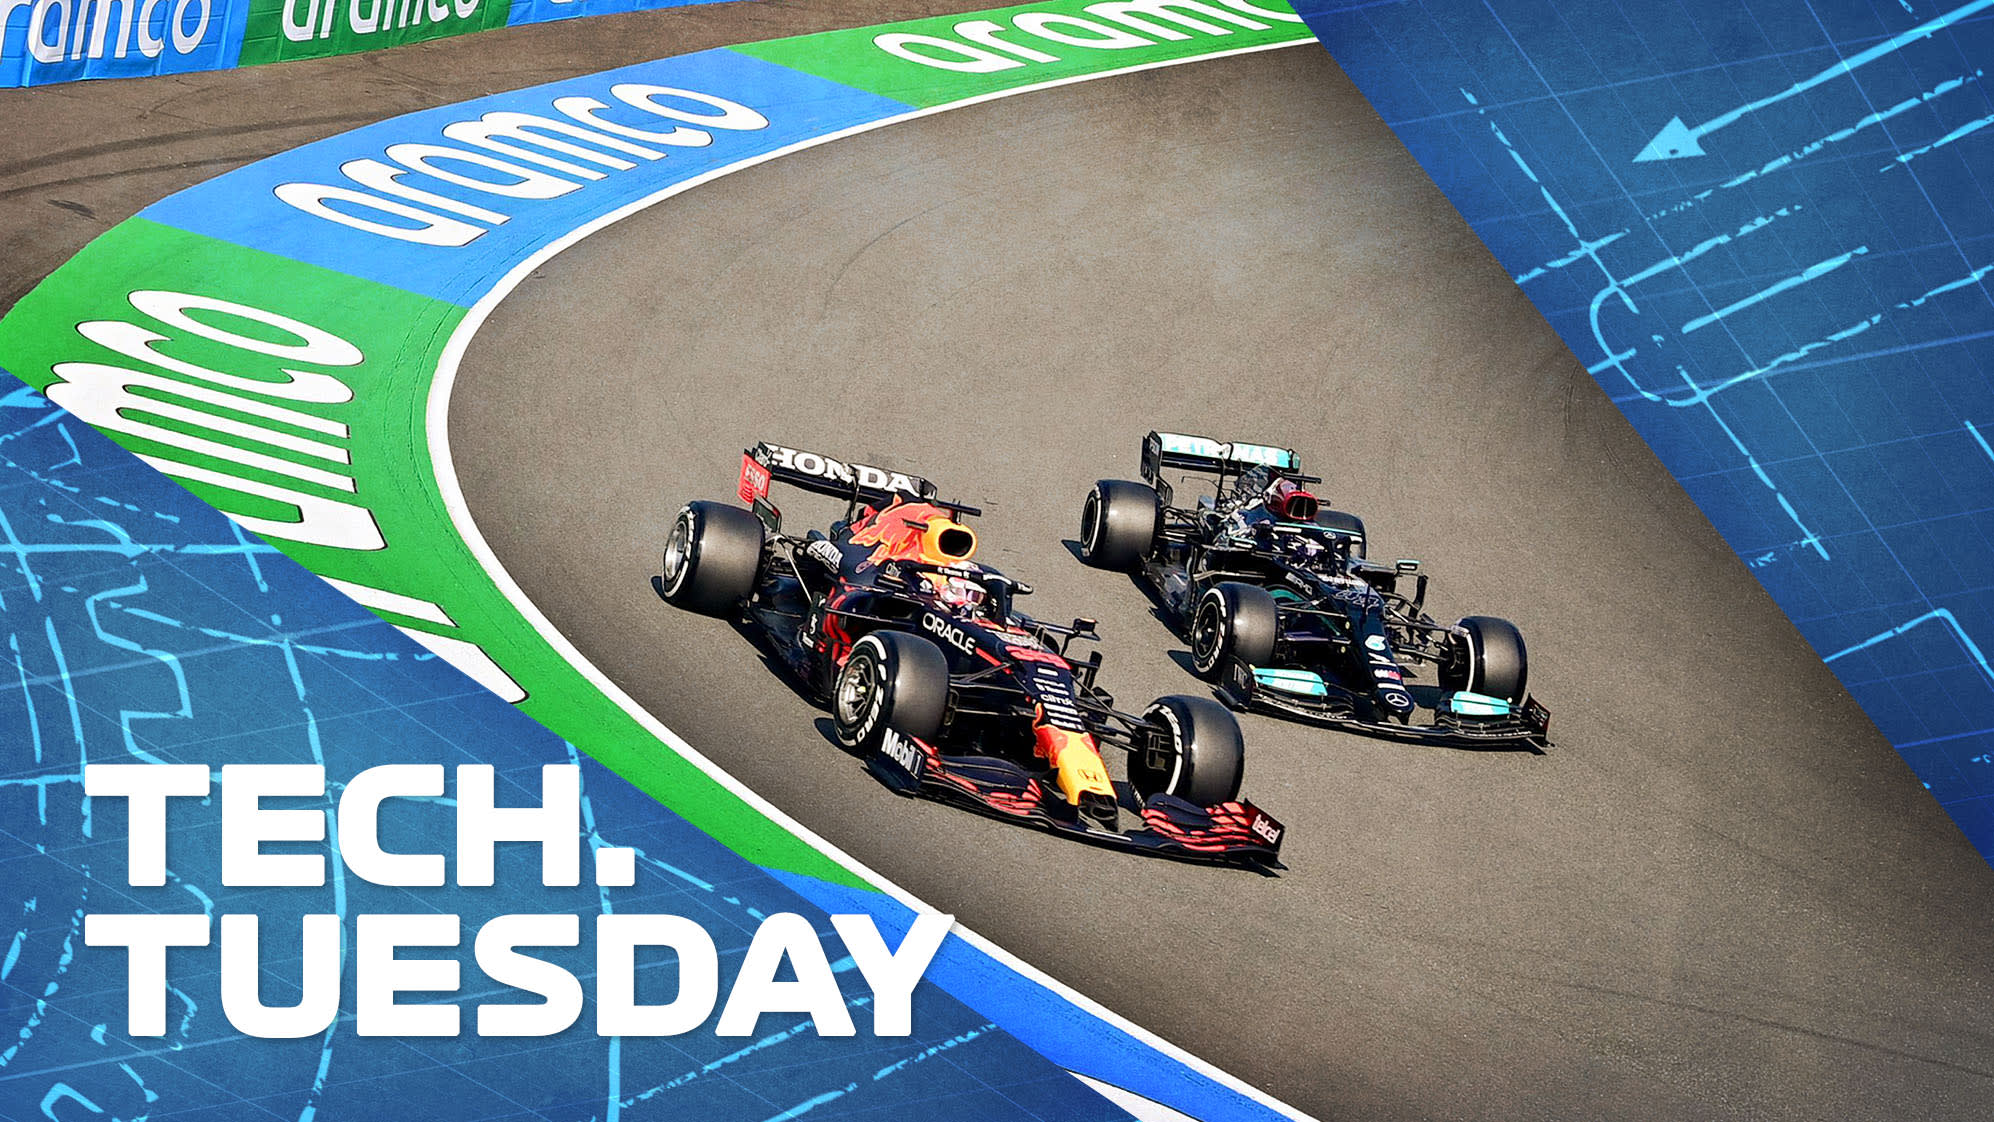 TECH TUESDAY Why Zandvoorts banking left Mercedes playing catch-up to Red Bull Formula 1®